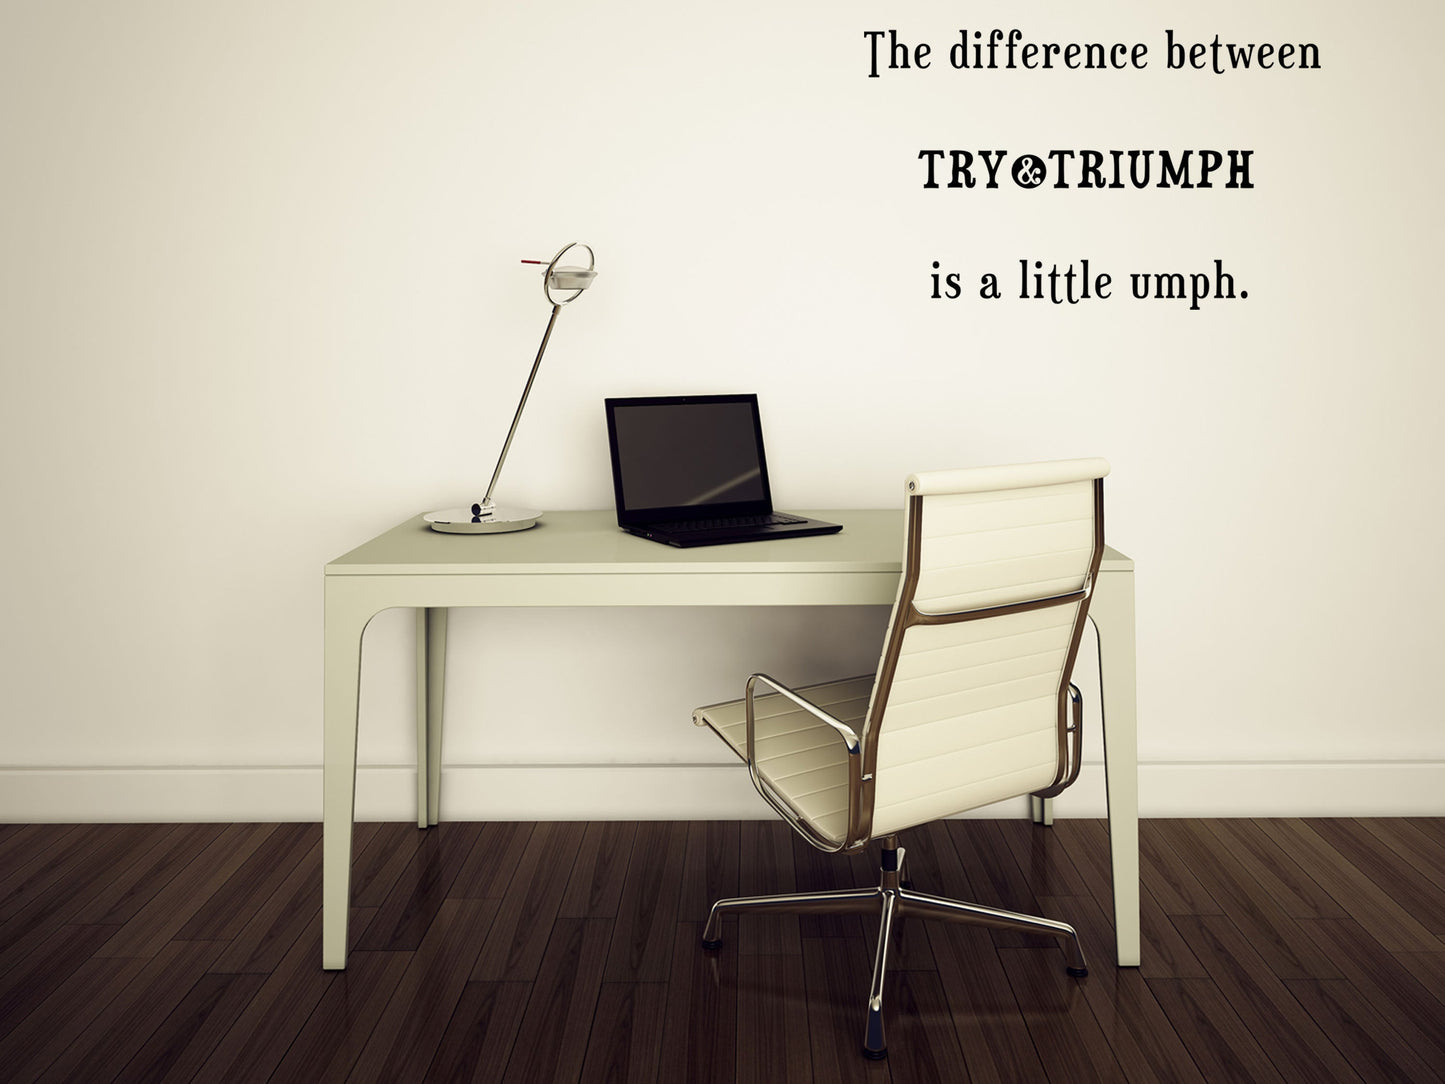 The Difference Between Try & Triumph Decal, Motivational Wall Decal, Wall Decals, Bedroom, Livingroom, Motivational Art Vinyl Wall Decal Title Done 